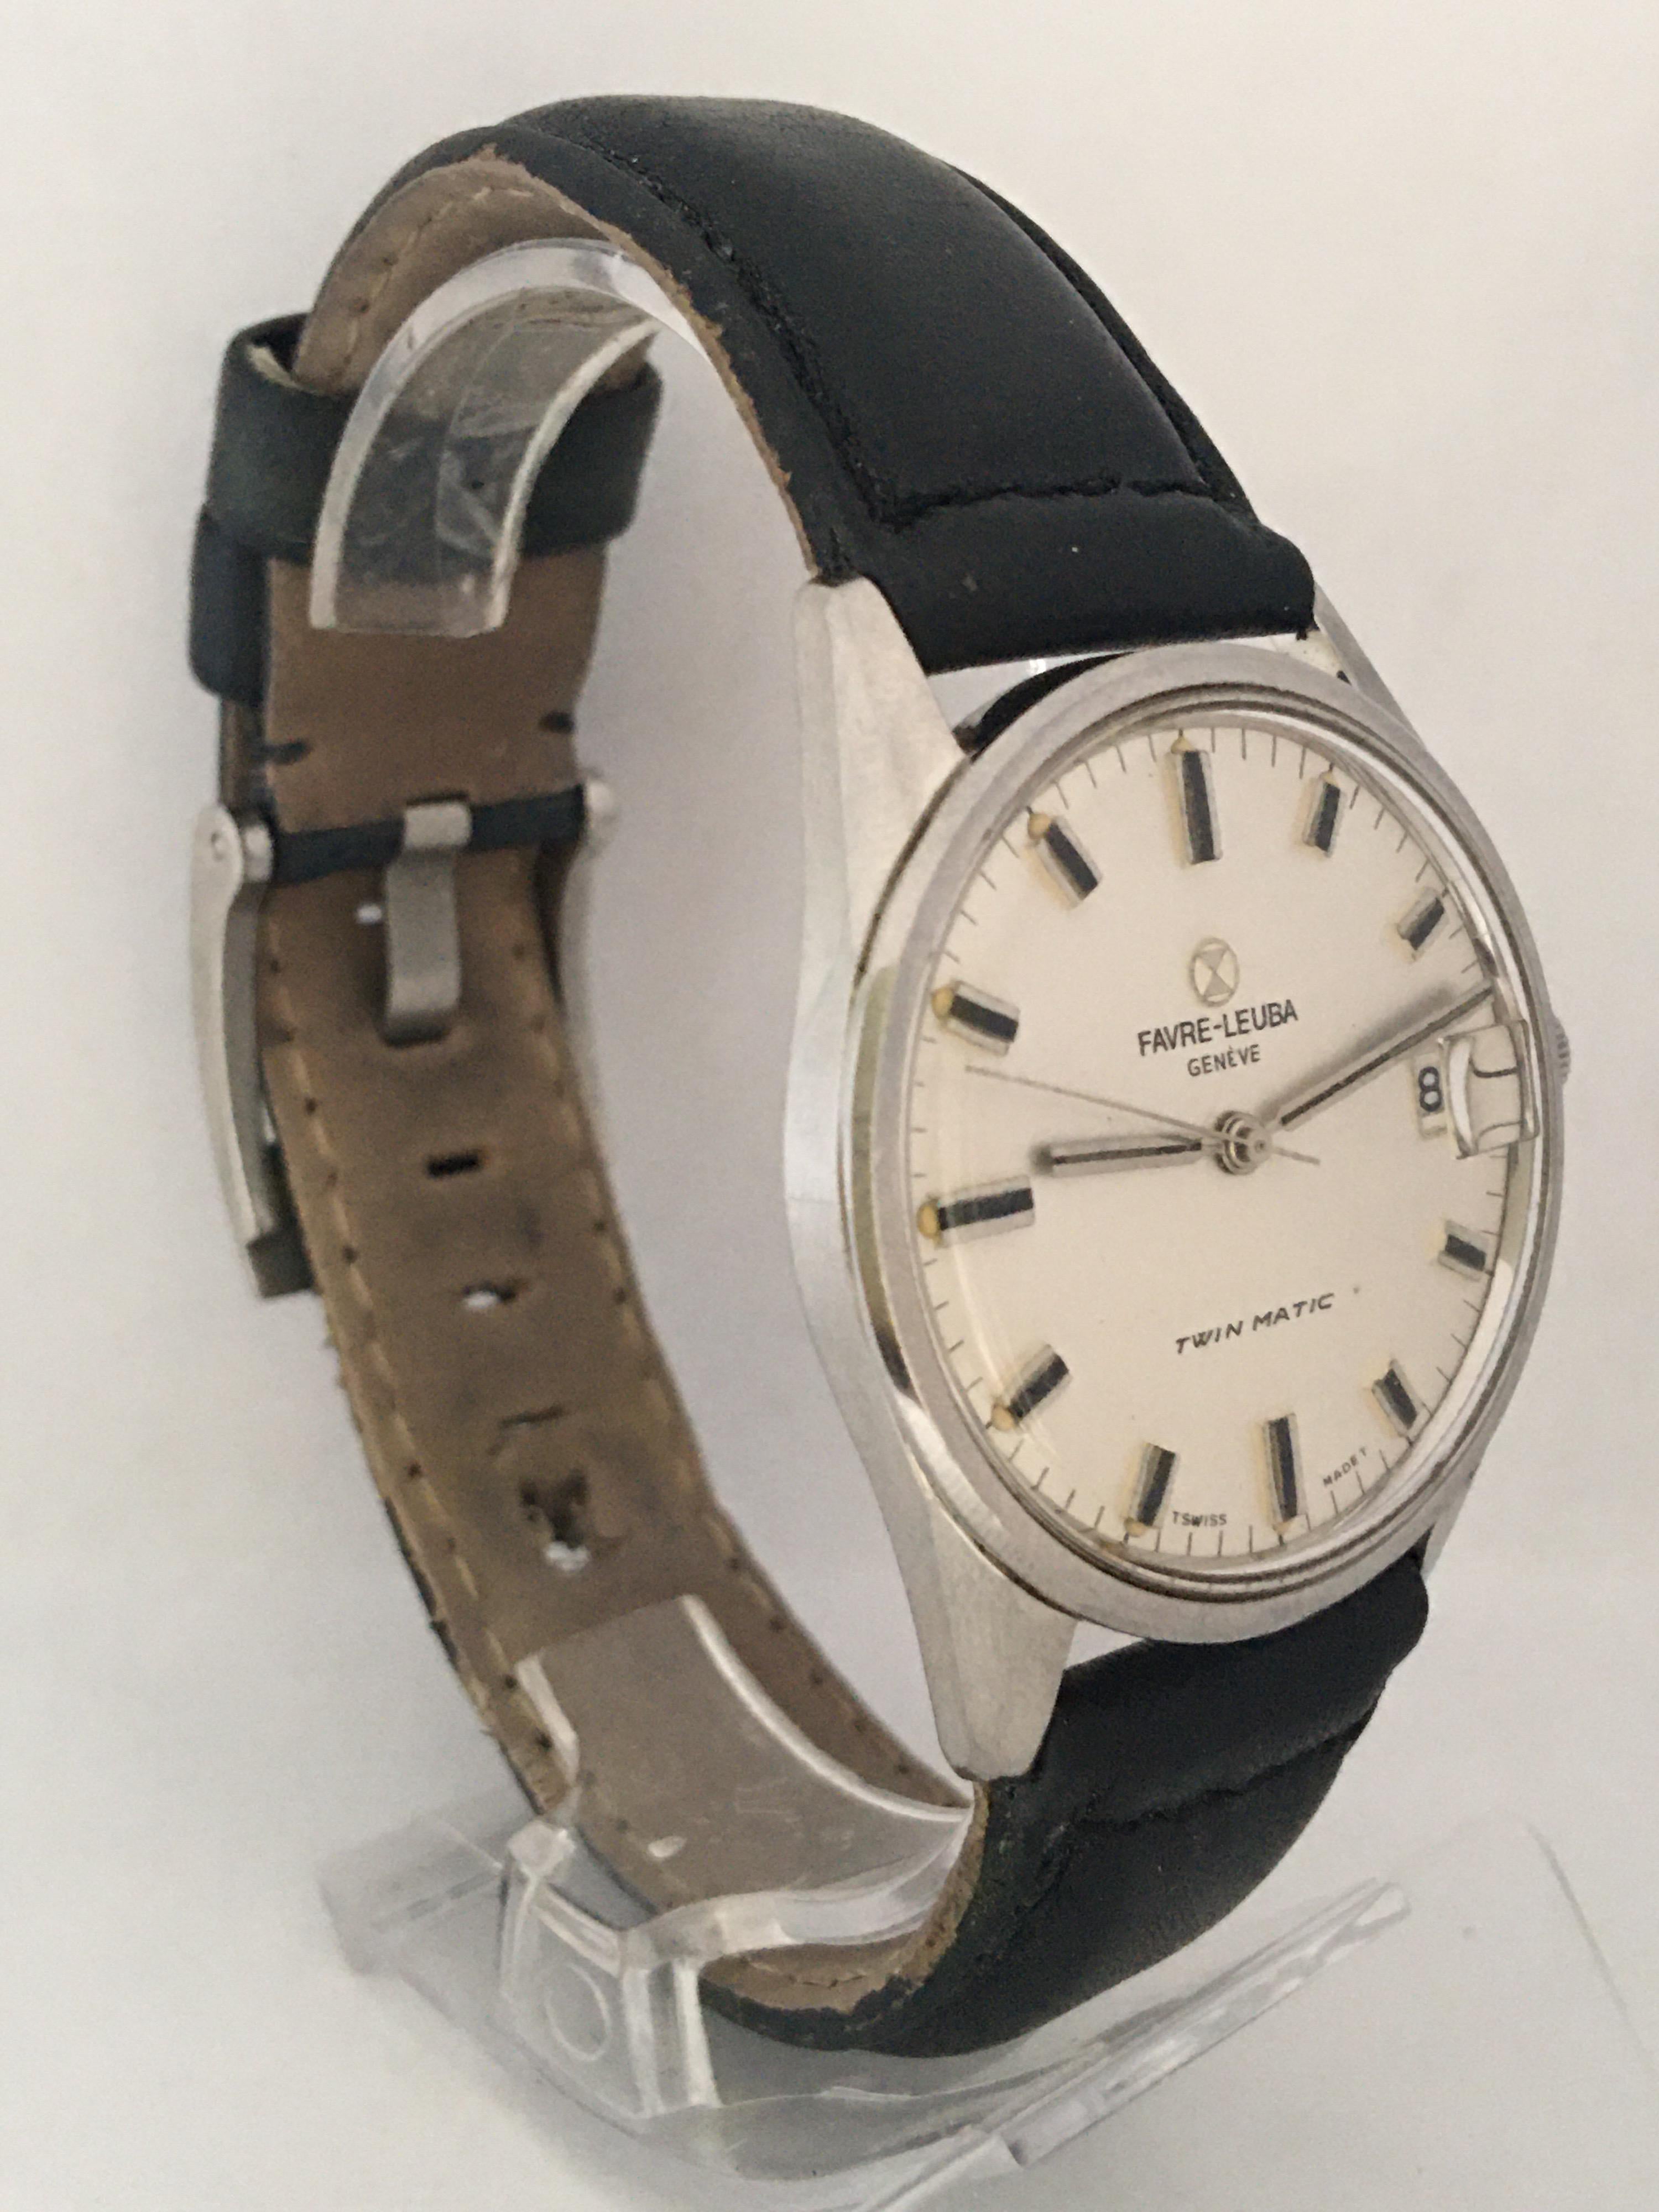 This beautiful pre-owned 35mm diameter (excluding crown) vintage automatic watch is in good working condition it keeps a good time. Visible signs of ageing and wear with some light marks on the case  surface as shown. 

Please study the images